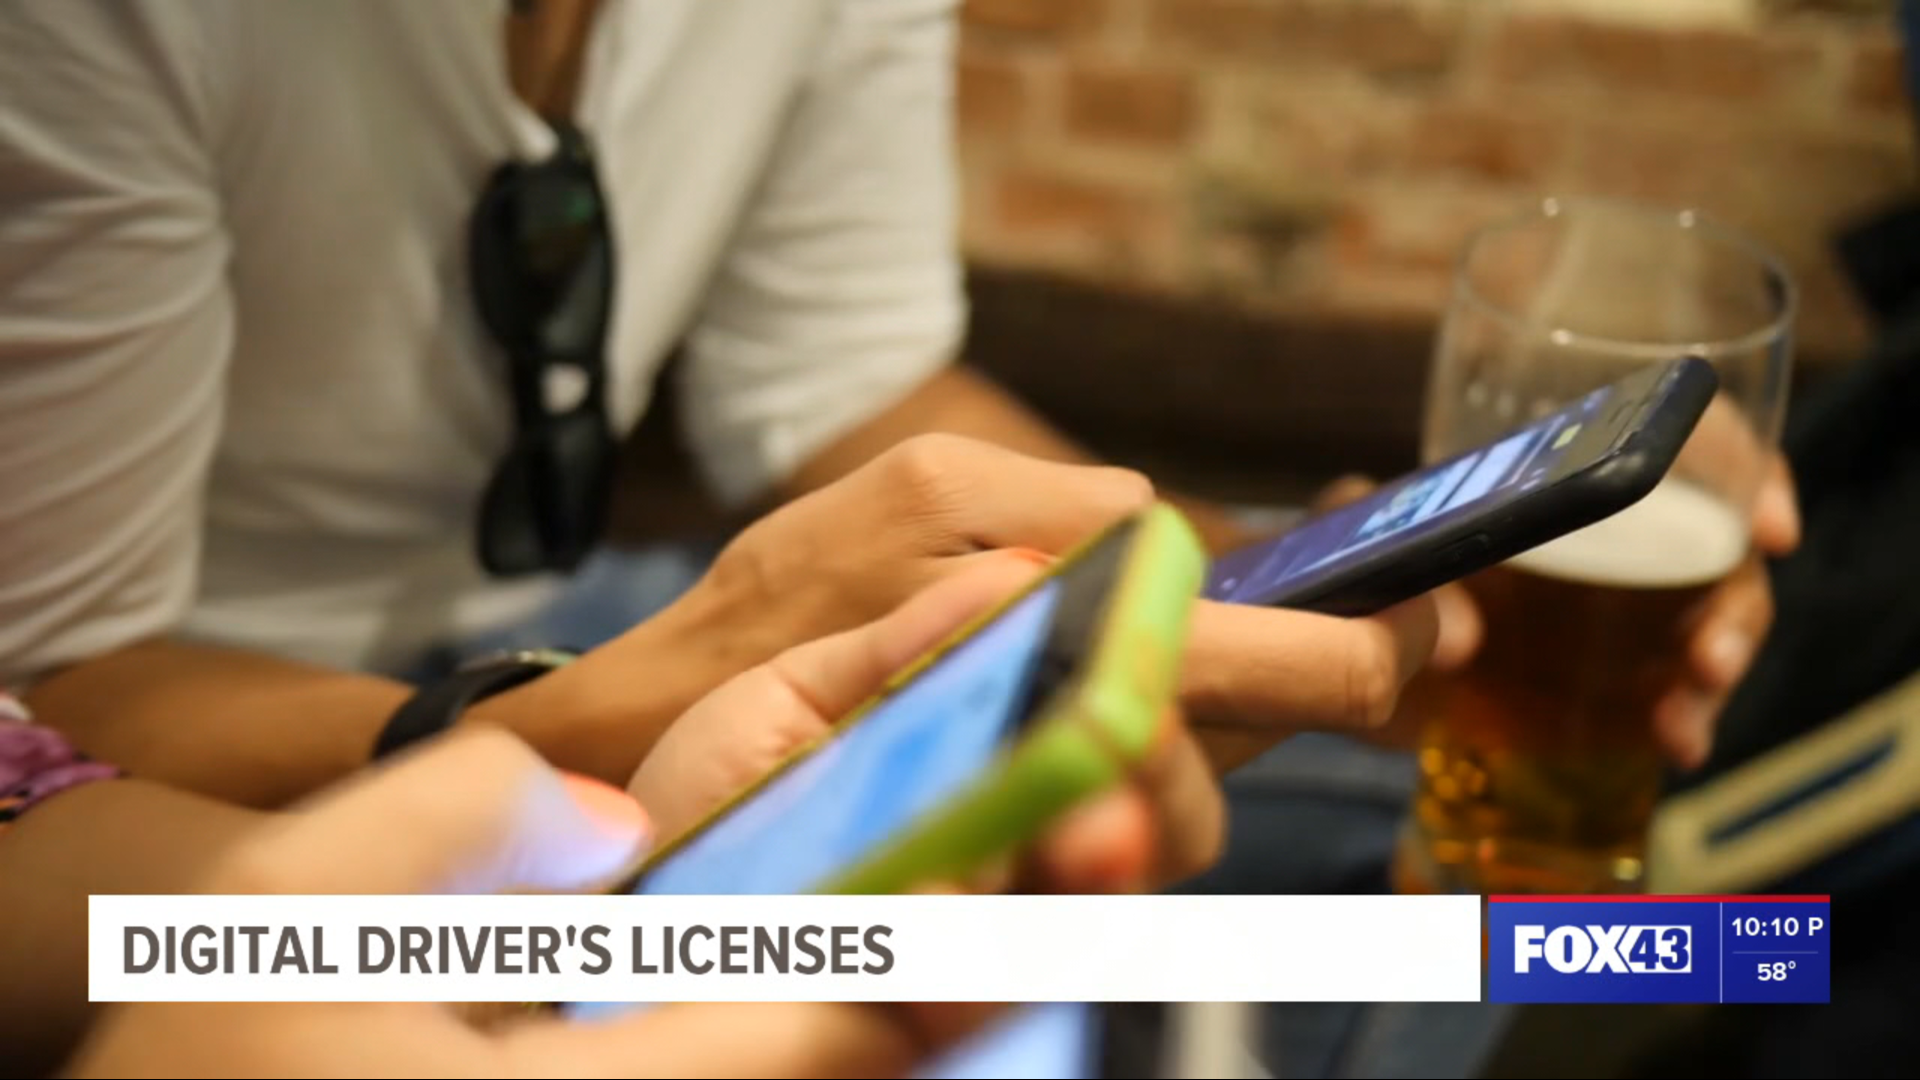 Americans may soon be able to pull out their phones instead of a plastic card to prove their identities, as multiple states develop digital driver’s licenses.